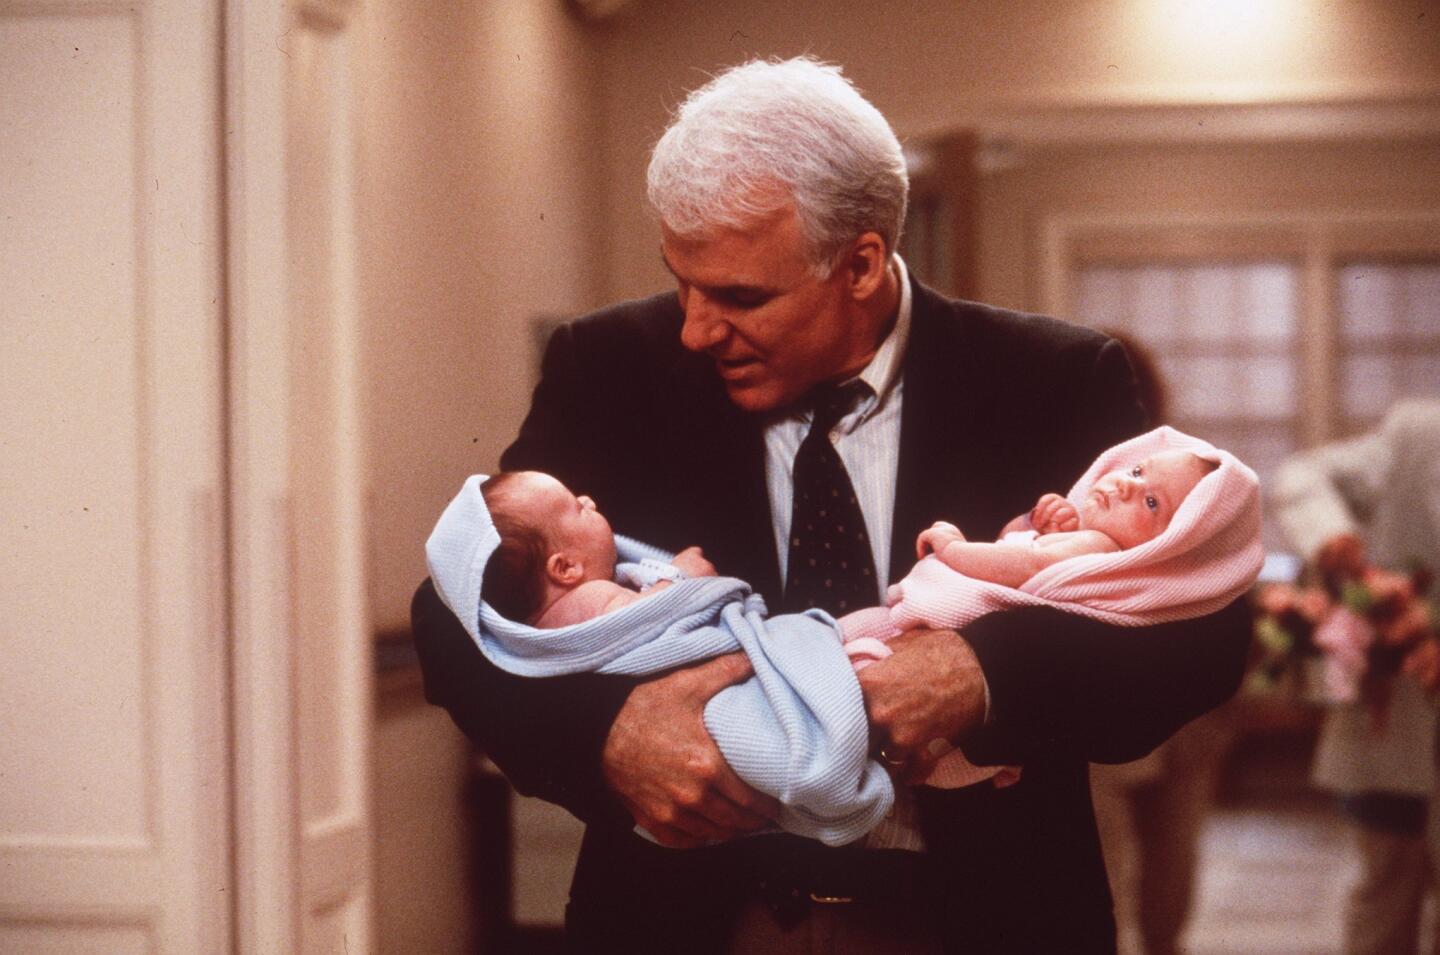 In this sequel to the 1991 film, Steve Martin reprises his role as George Banks, who faces a midlife crisis as he watches his daughter grow up and become a wife and mother, all while he and his wife are also expecting another child.